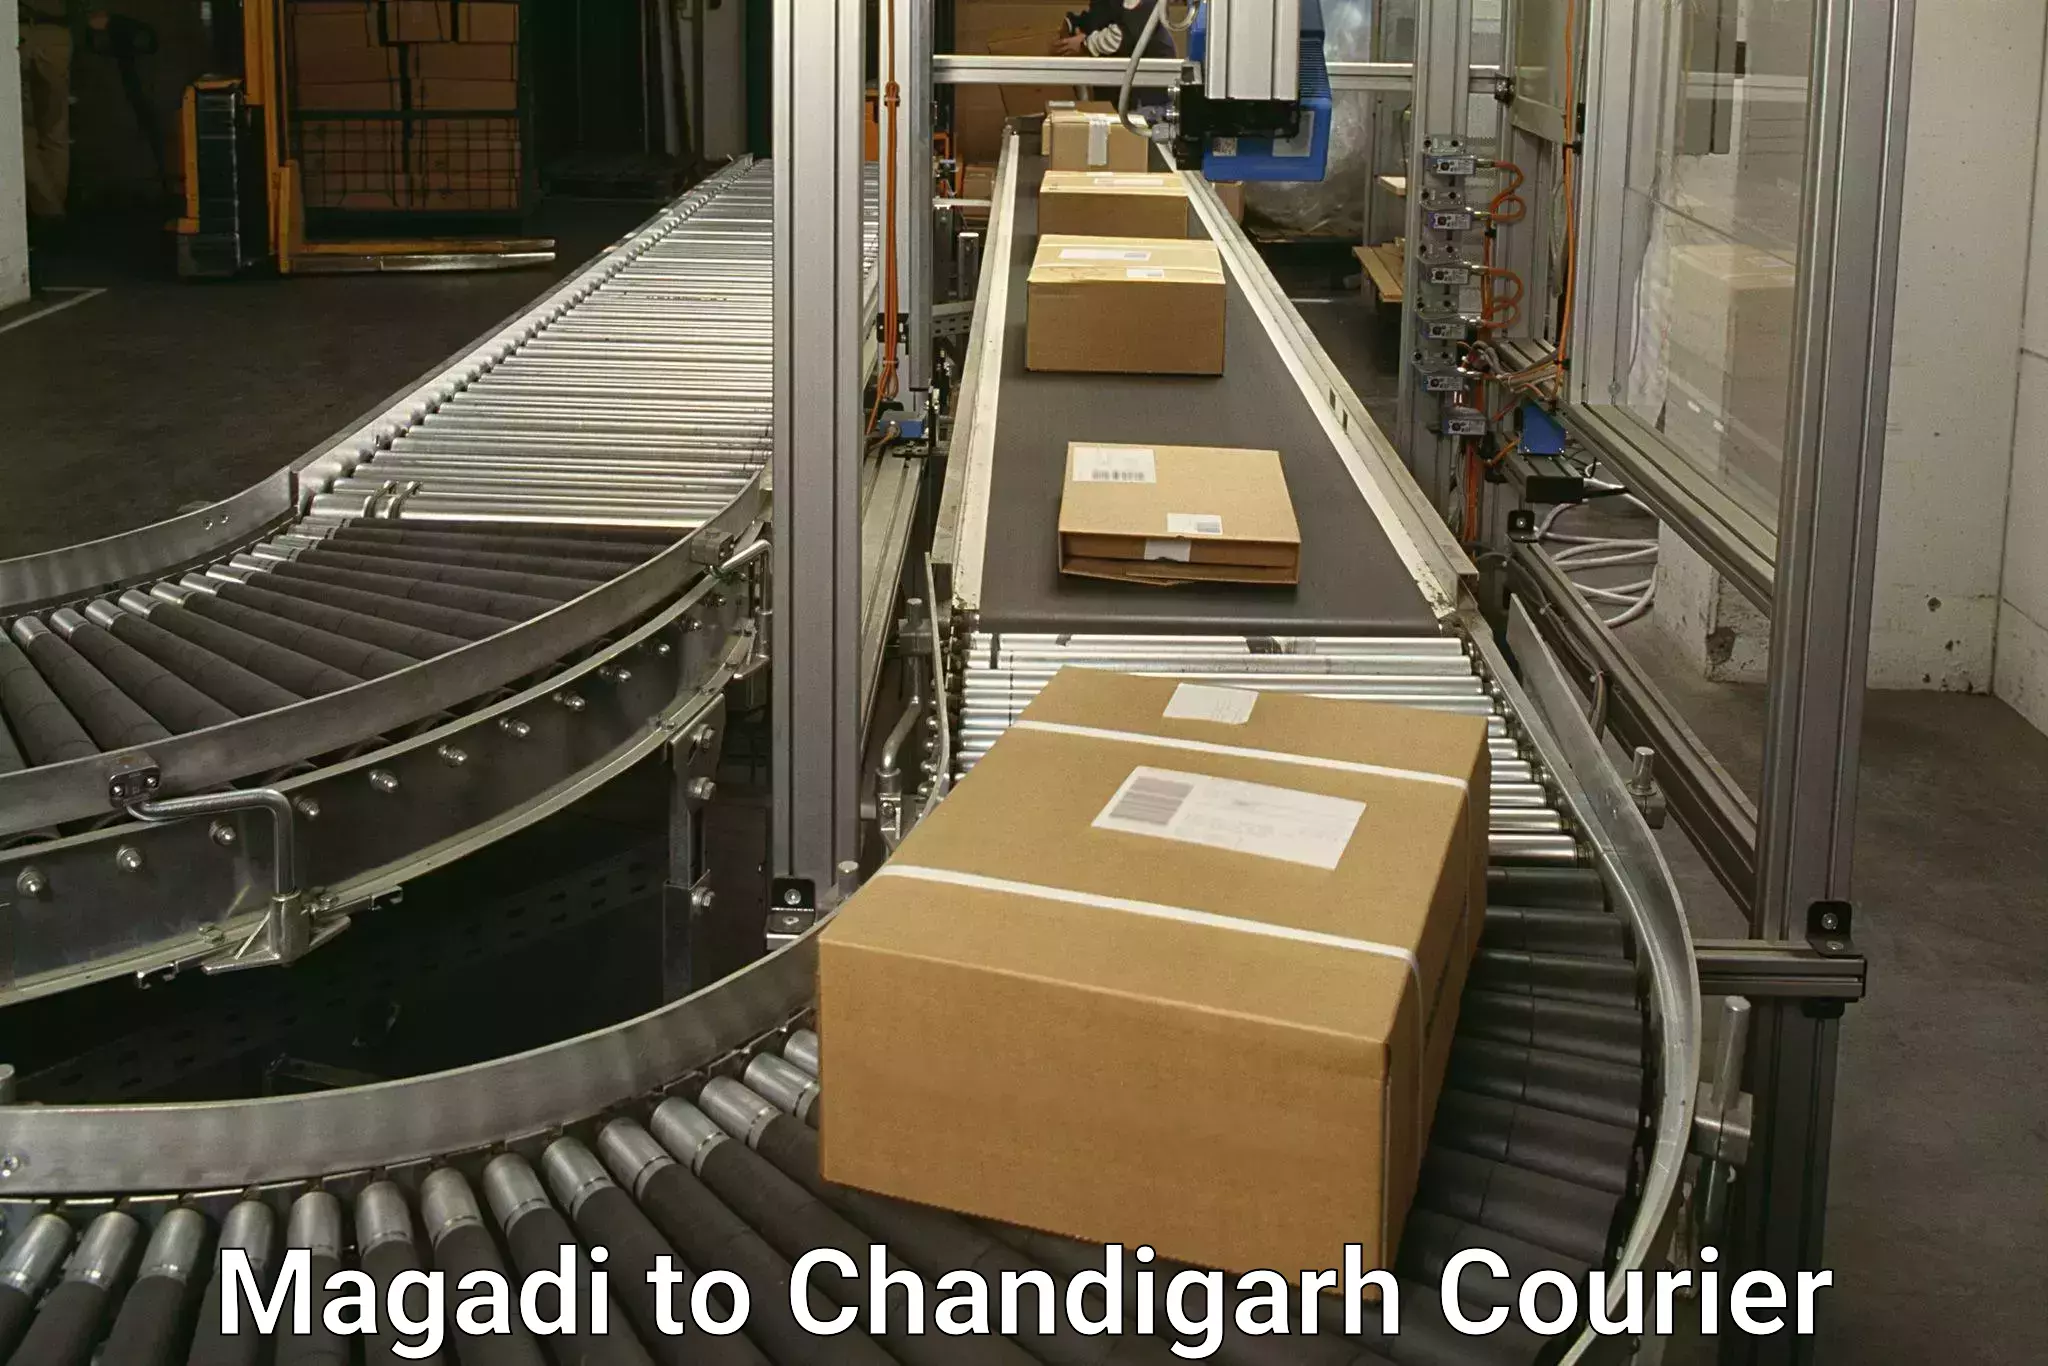 Courier service efficiency Magadi to Chandigarh